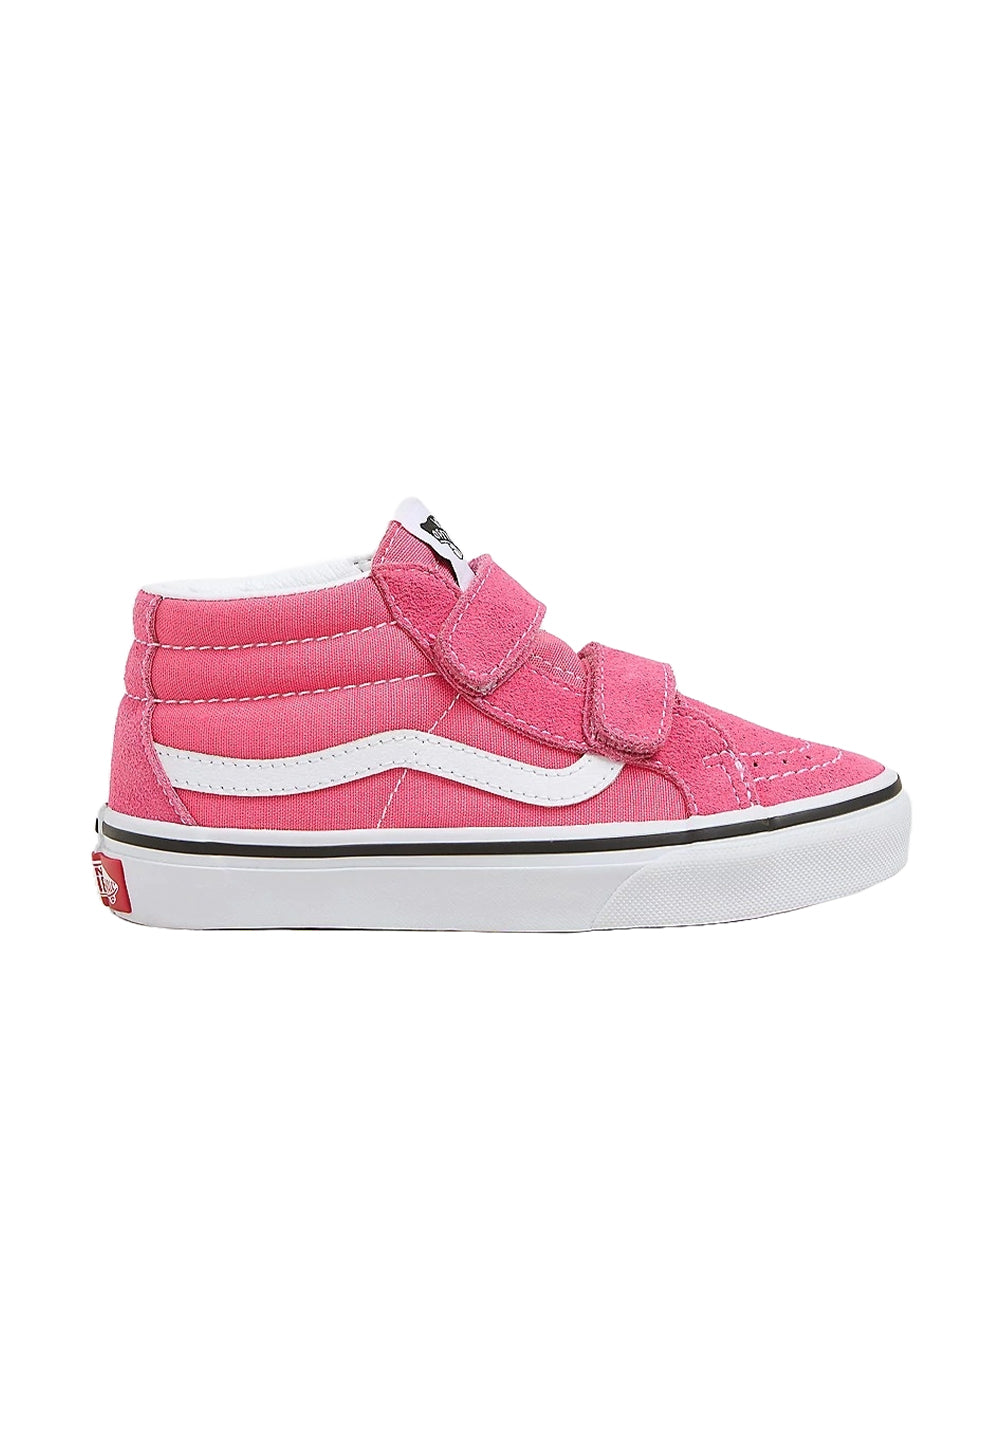 Pink shoes for baby girls